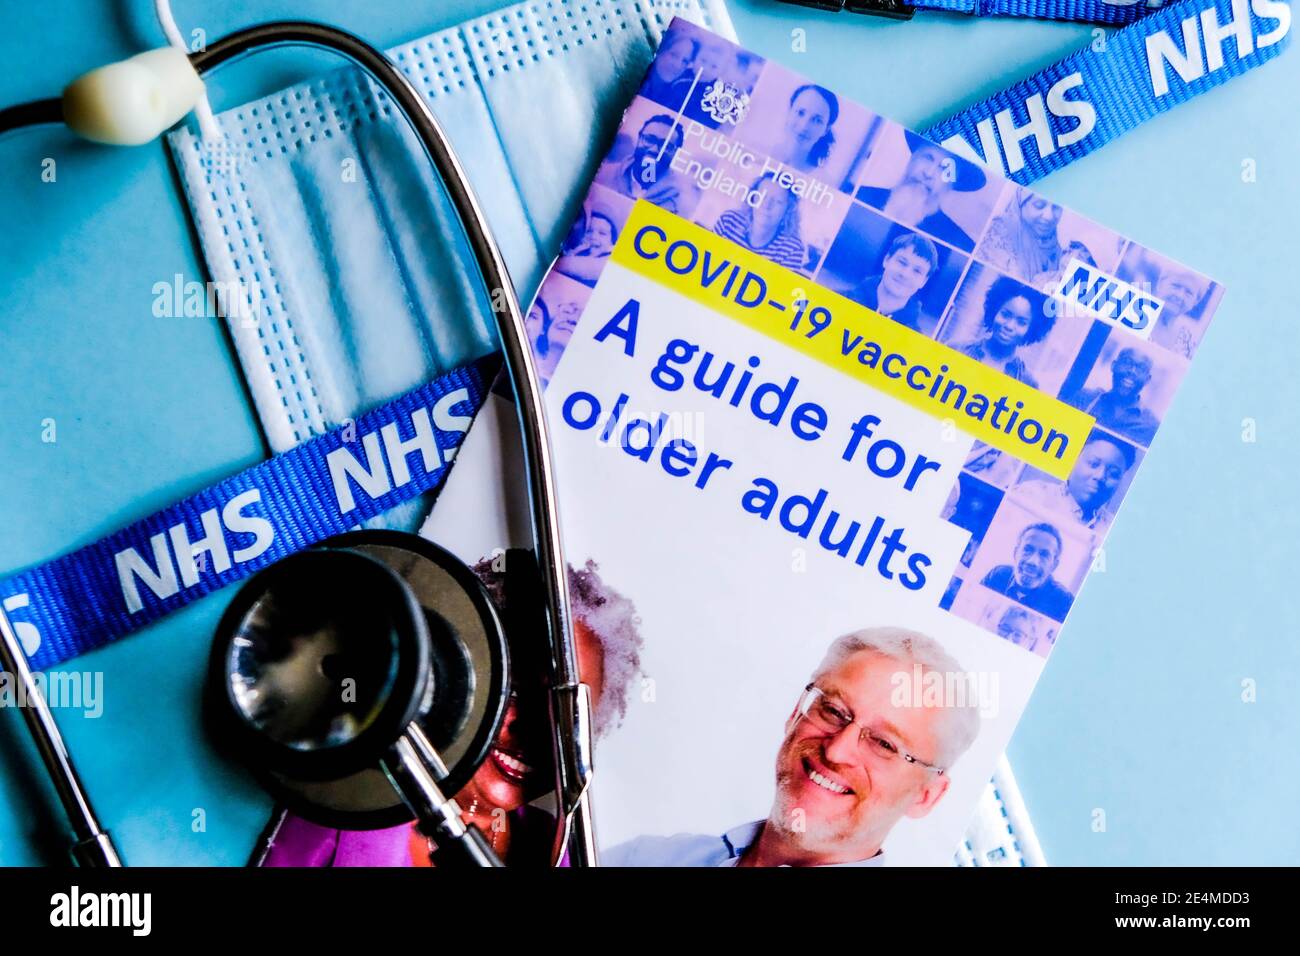 London UK, January 24 2021, COVID-19 Vaccination NHS Patient Guide For Older Adults Stock Photo